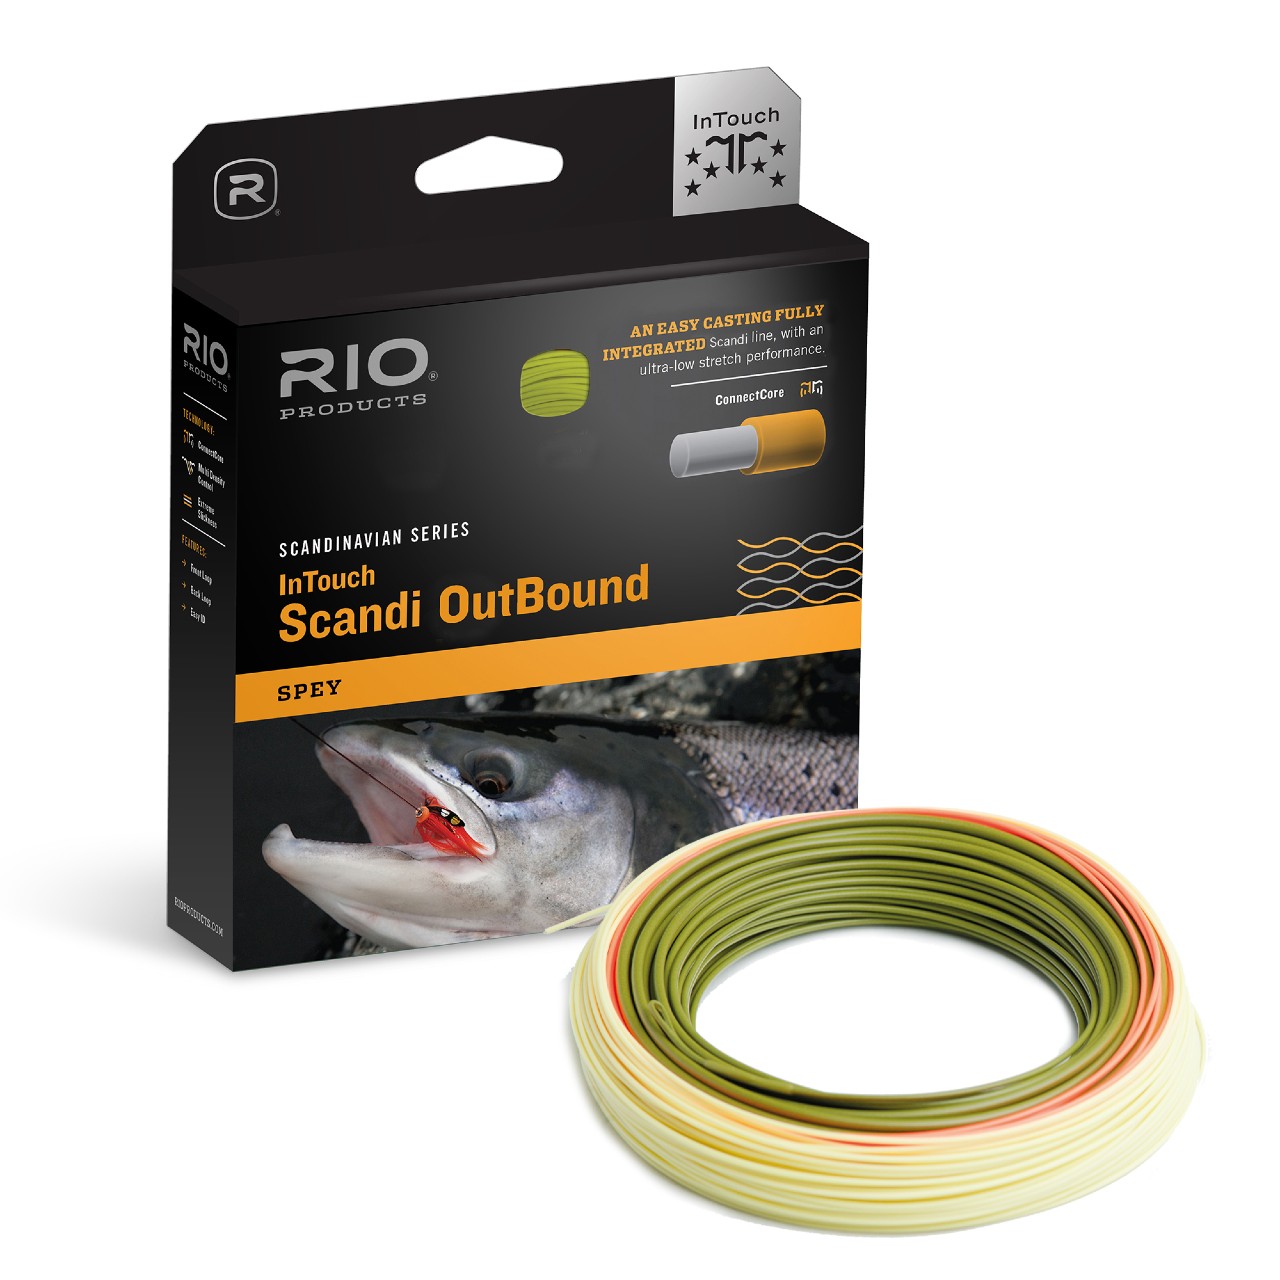 RIO Intouch Scandi Outbound Switch